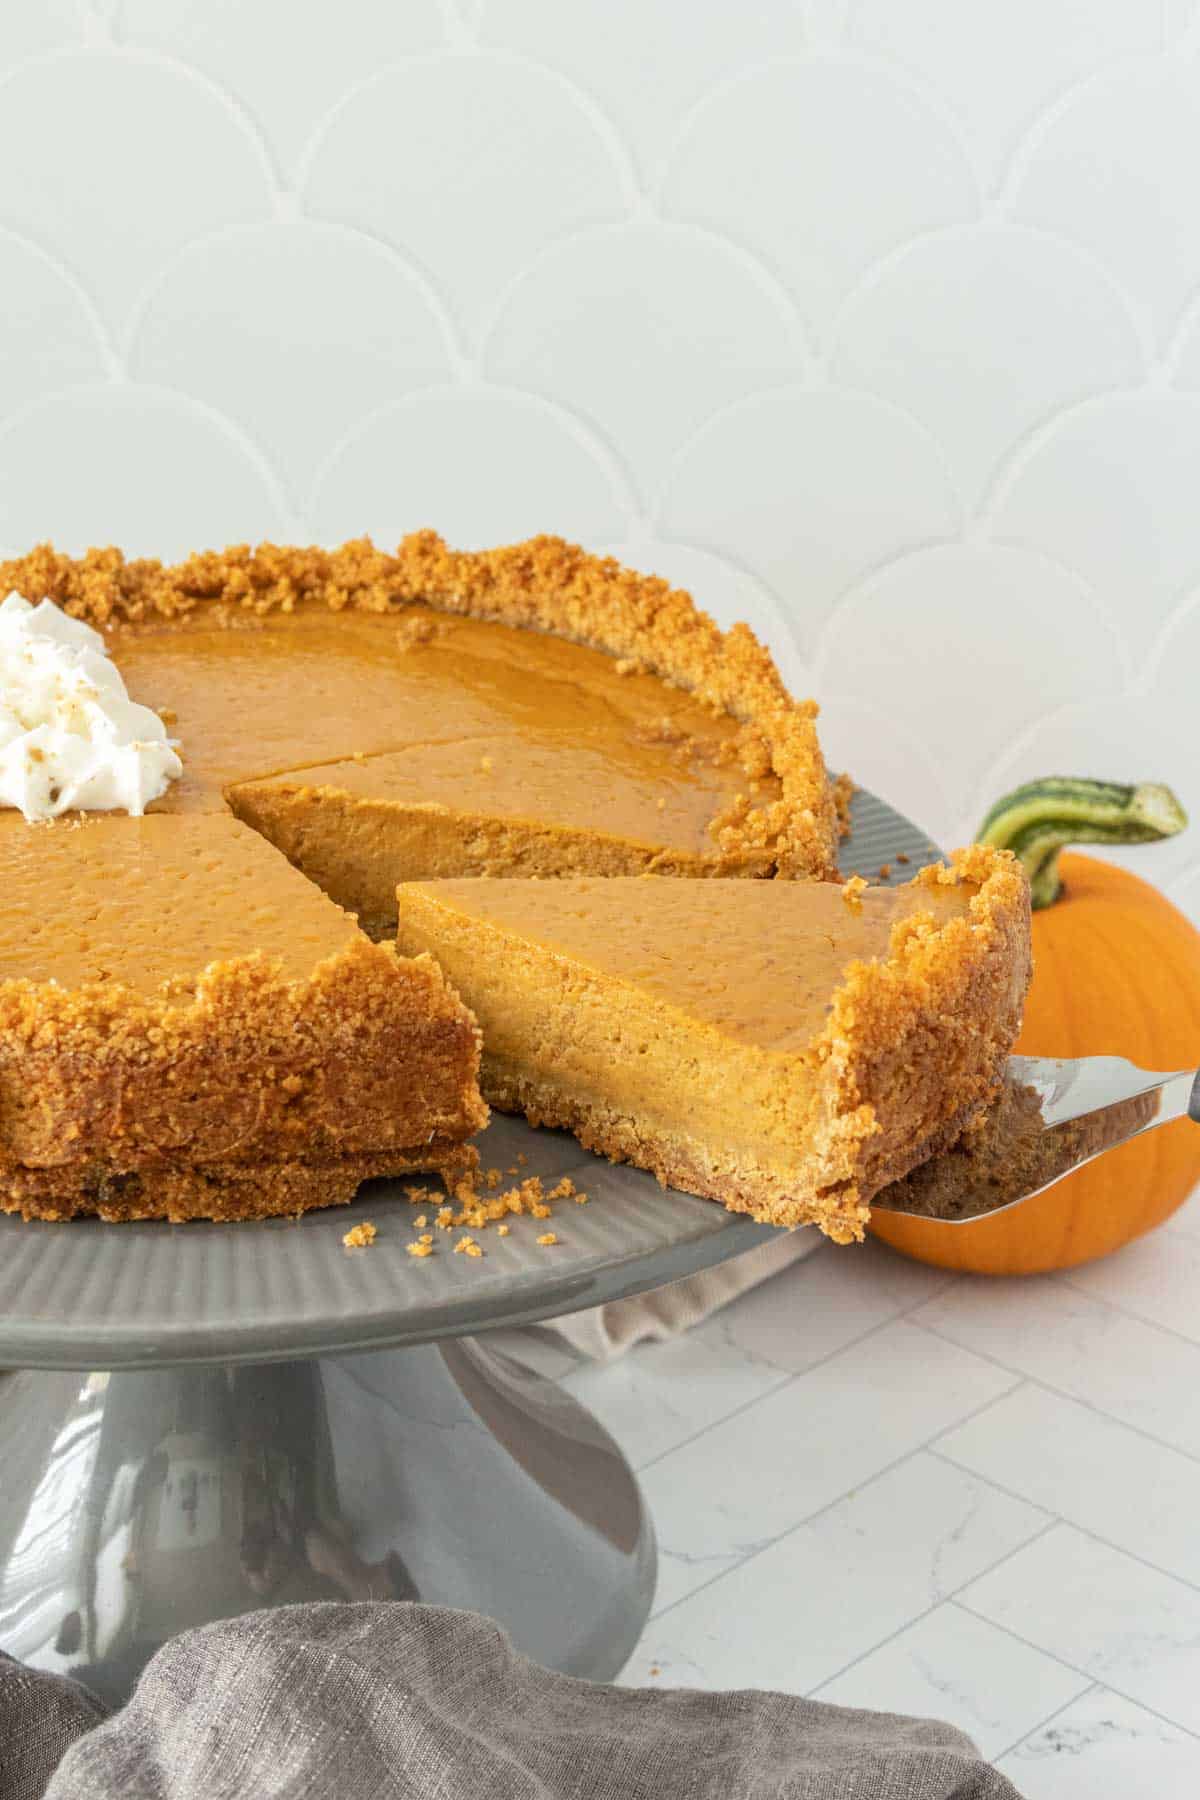 Pumpkin pie on a plate with a slice taken out.